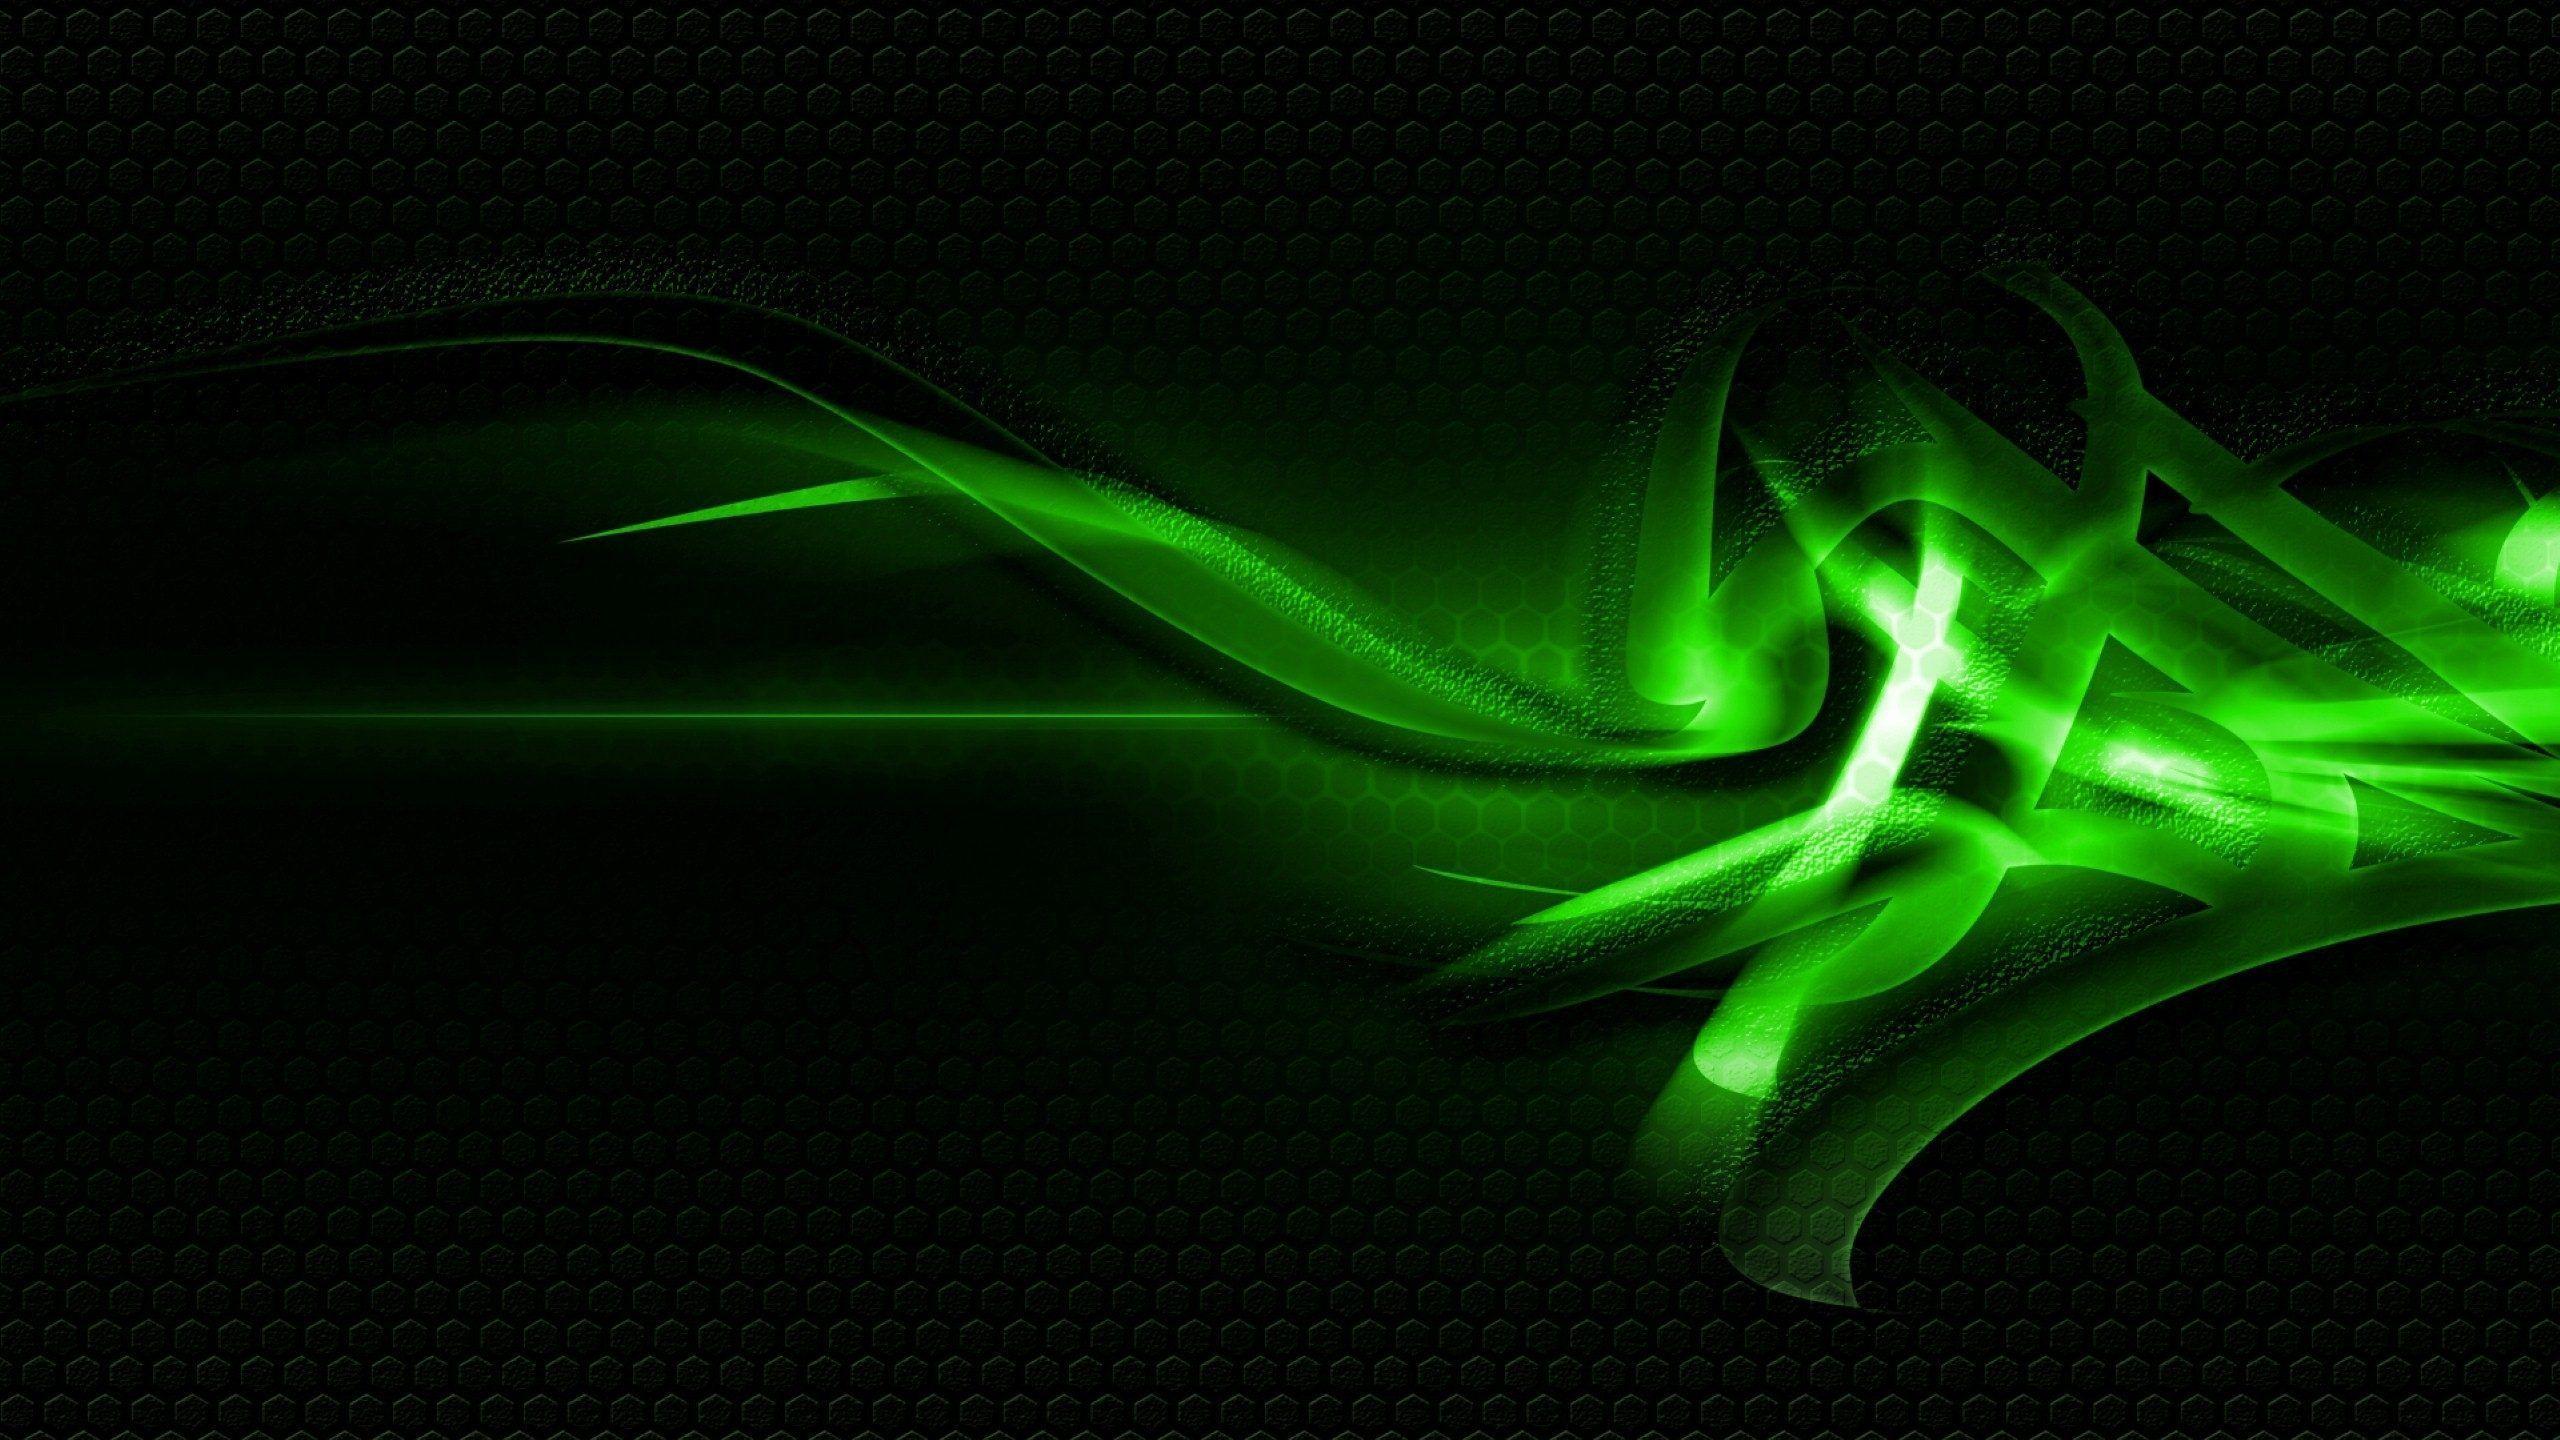 Hp Pavilion Green Wallpapers Top Free Hp Pavilion Green Backgrounds Wallpaperaccess